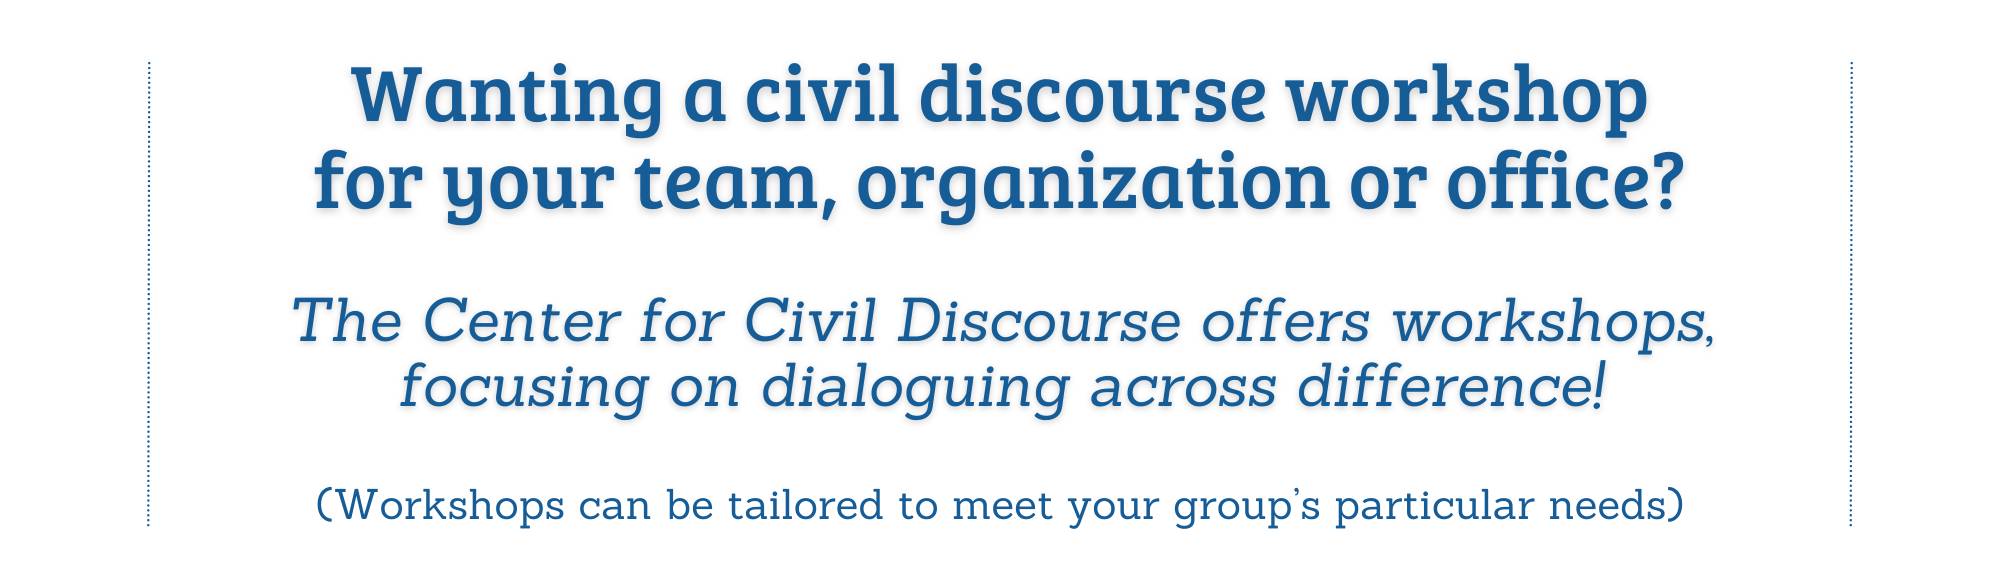 Wanting a civil discourse workshop for your team, organization or office?  The Center for Civil Discourse offers workshops, focusing on dialoguing across difference. Workshops are tailored to meet your group's needs.